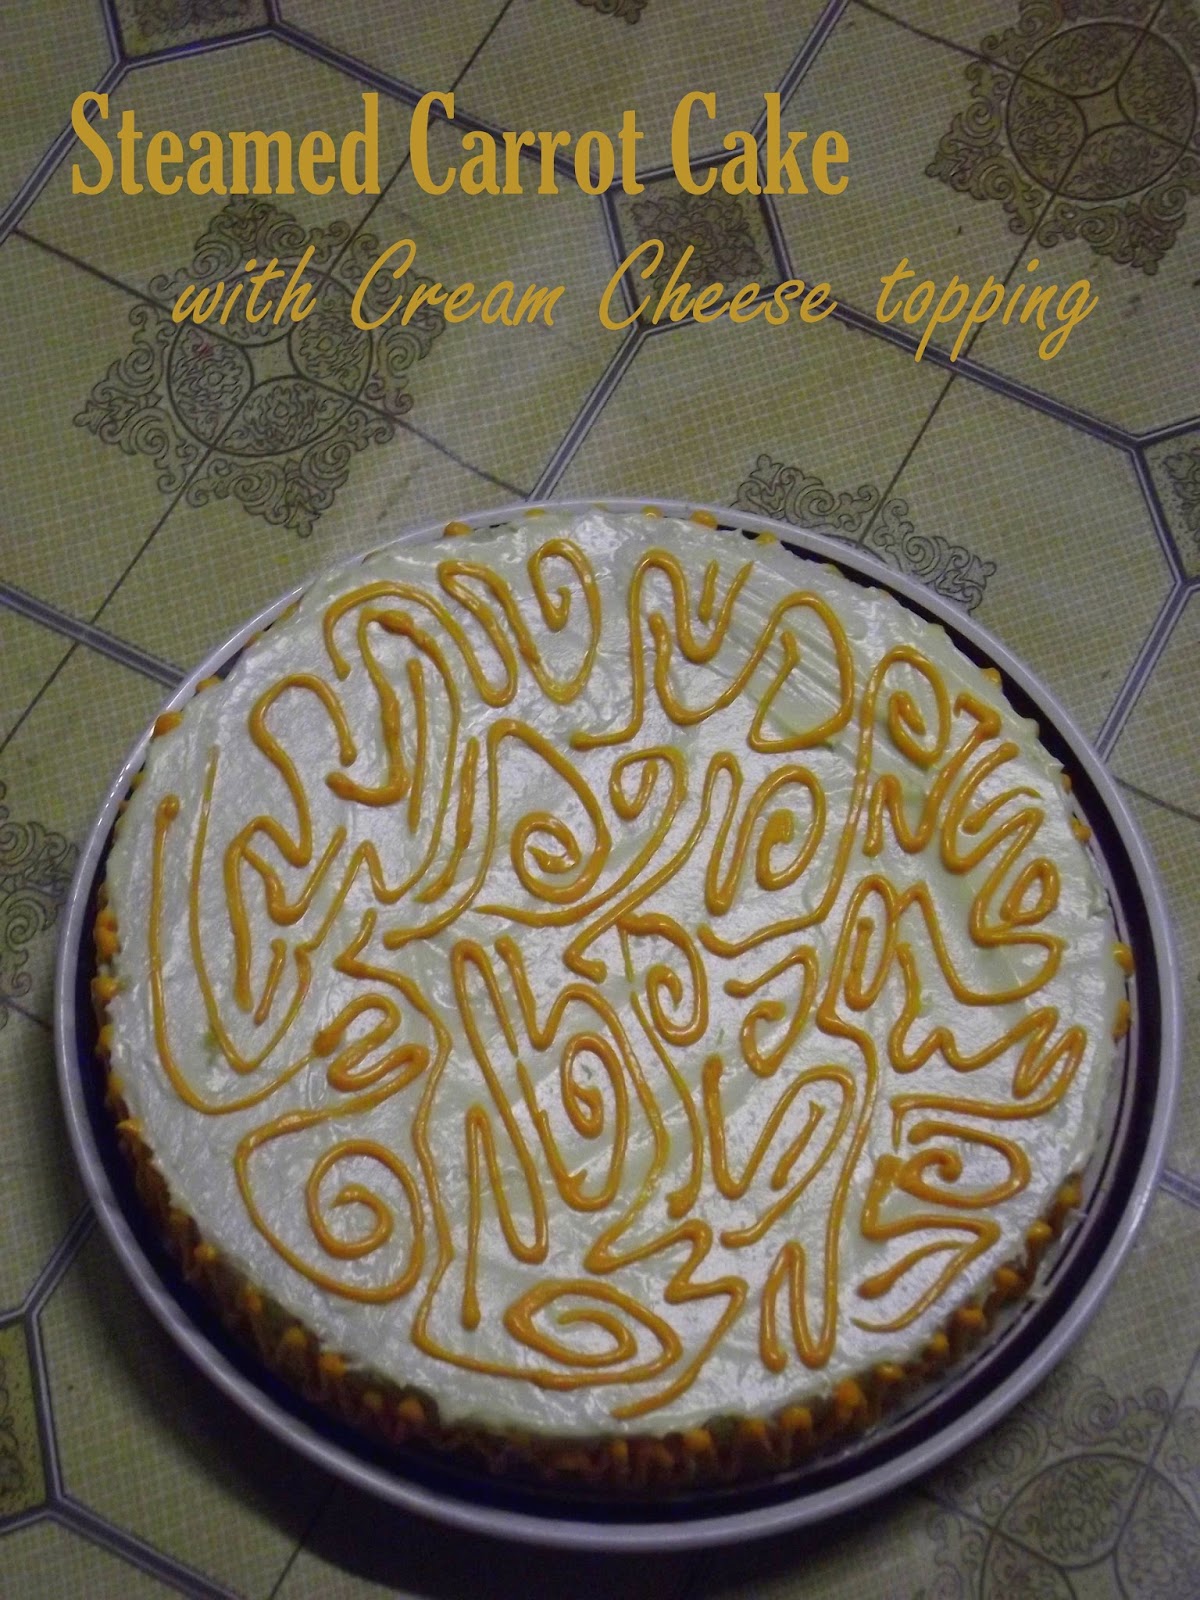 SALAM DUNIA: Steamed Carrot Cake with Cream Cheese topping